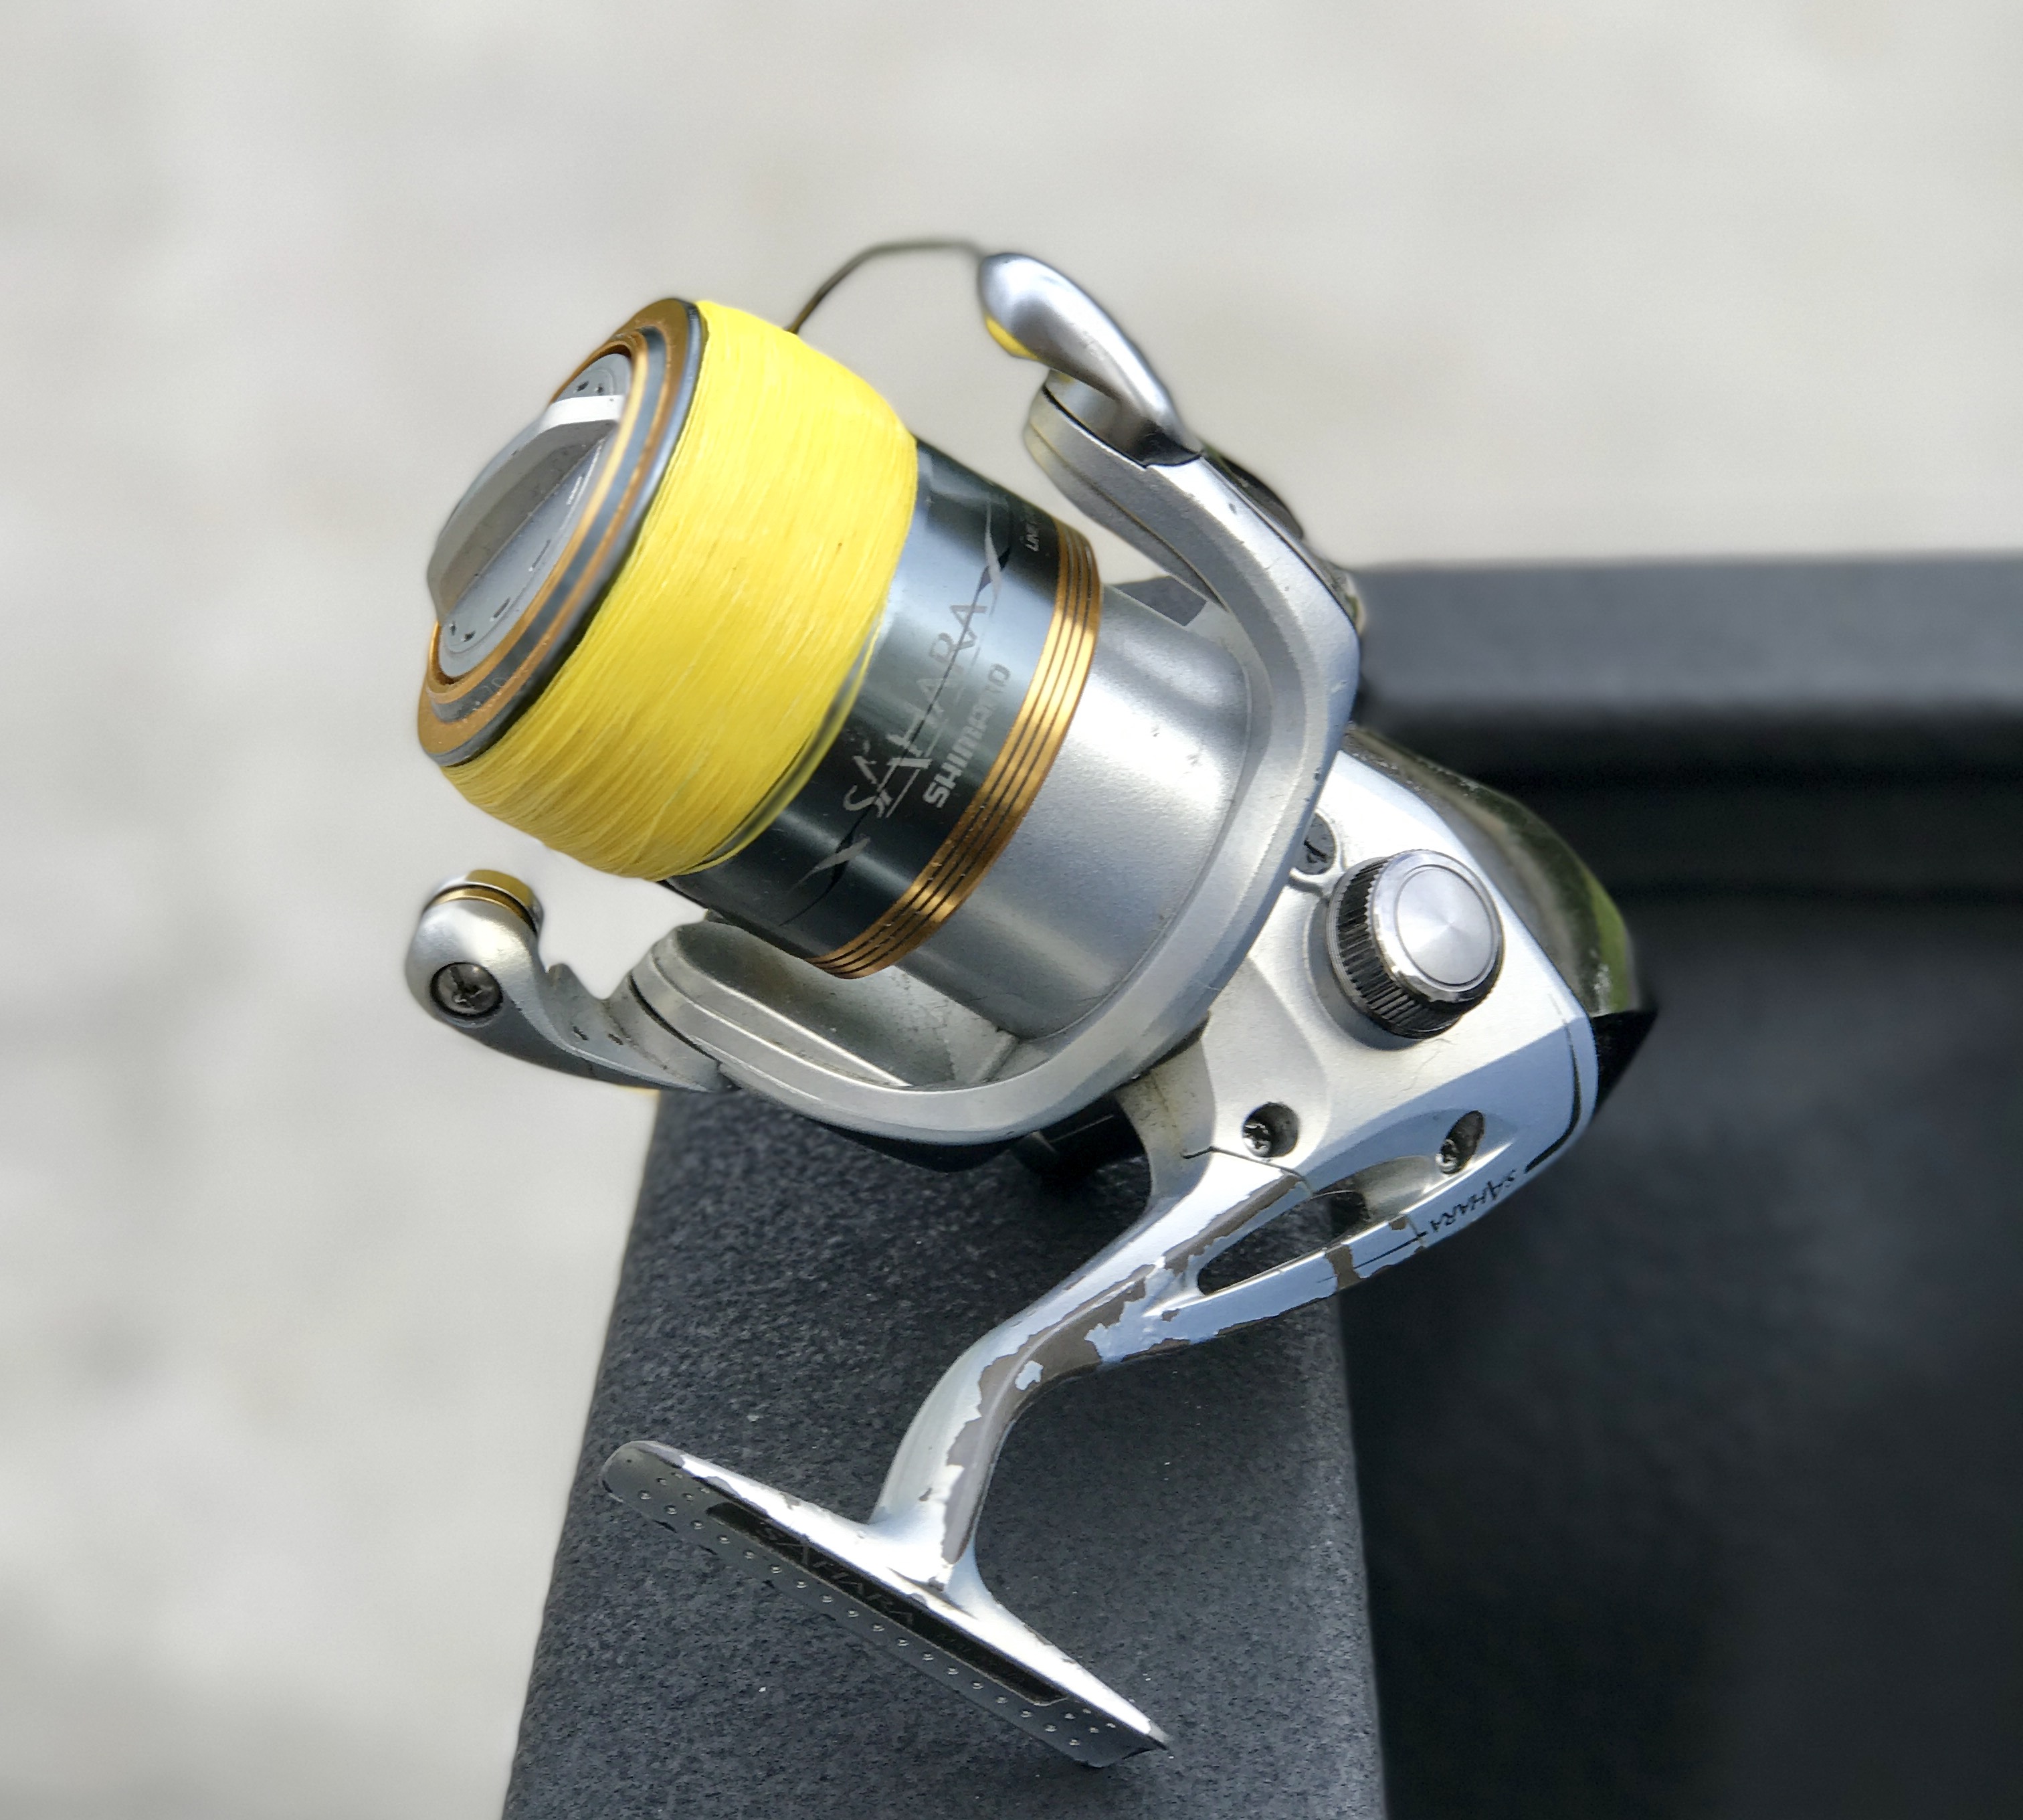 Quick Tip To Spool Your Spinning Reel To Avoid Line Twists